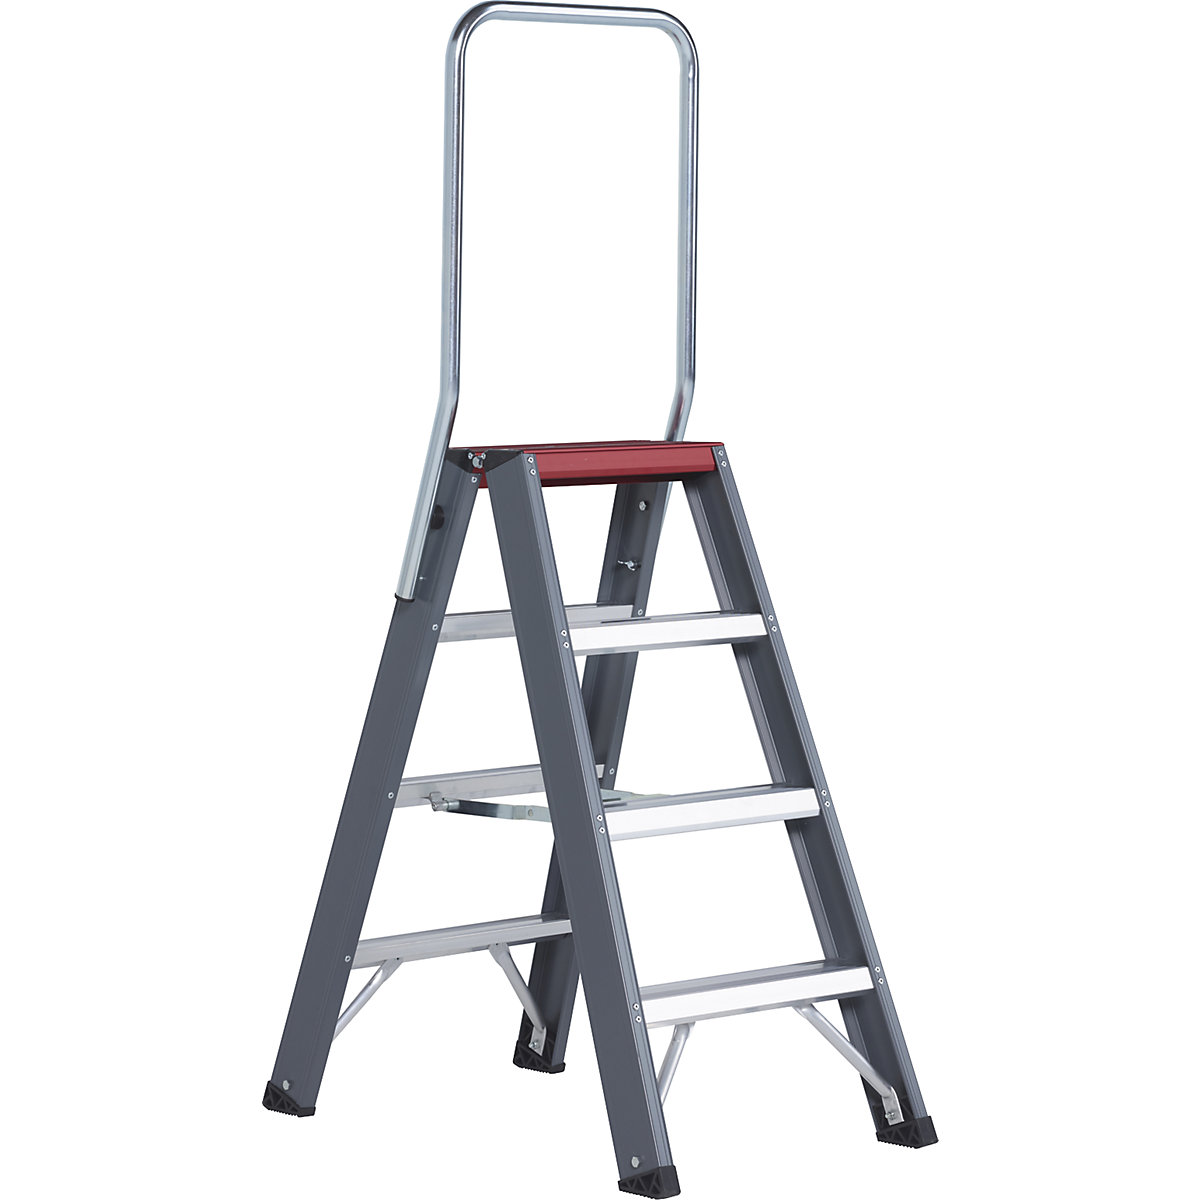 Aluminium step ladder – Altrex, double sided access, 2 x 4 steps, working height 2950 mm-4